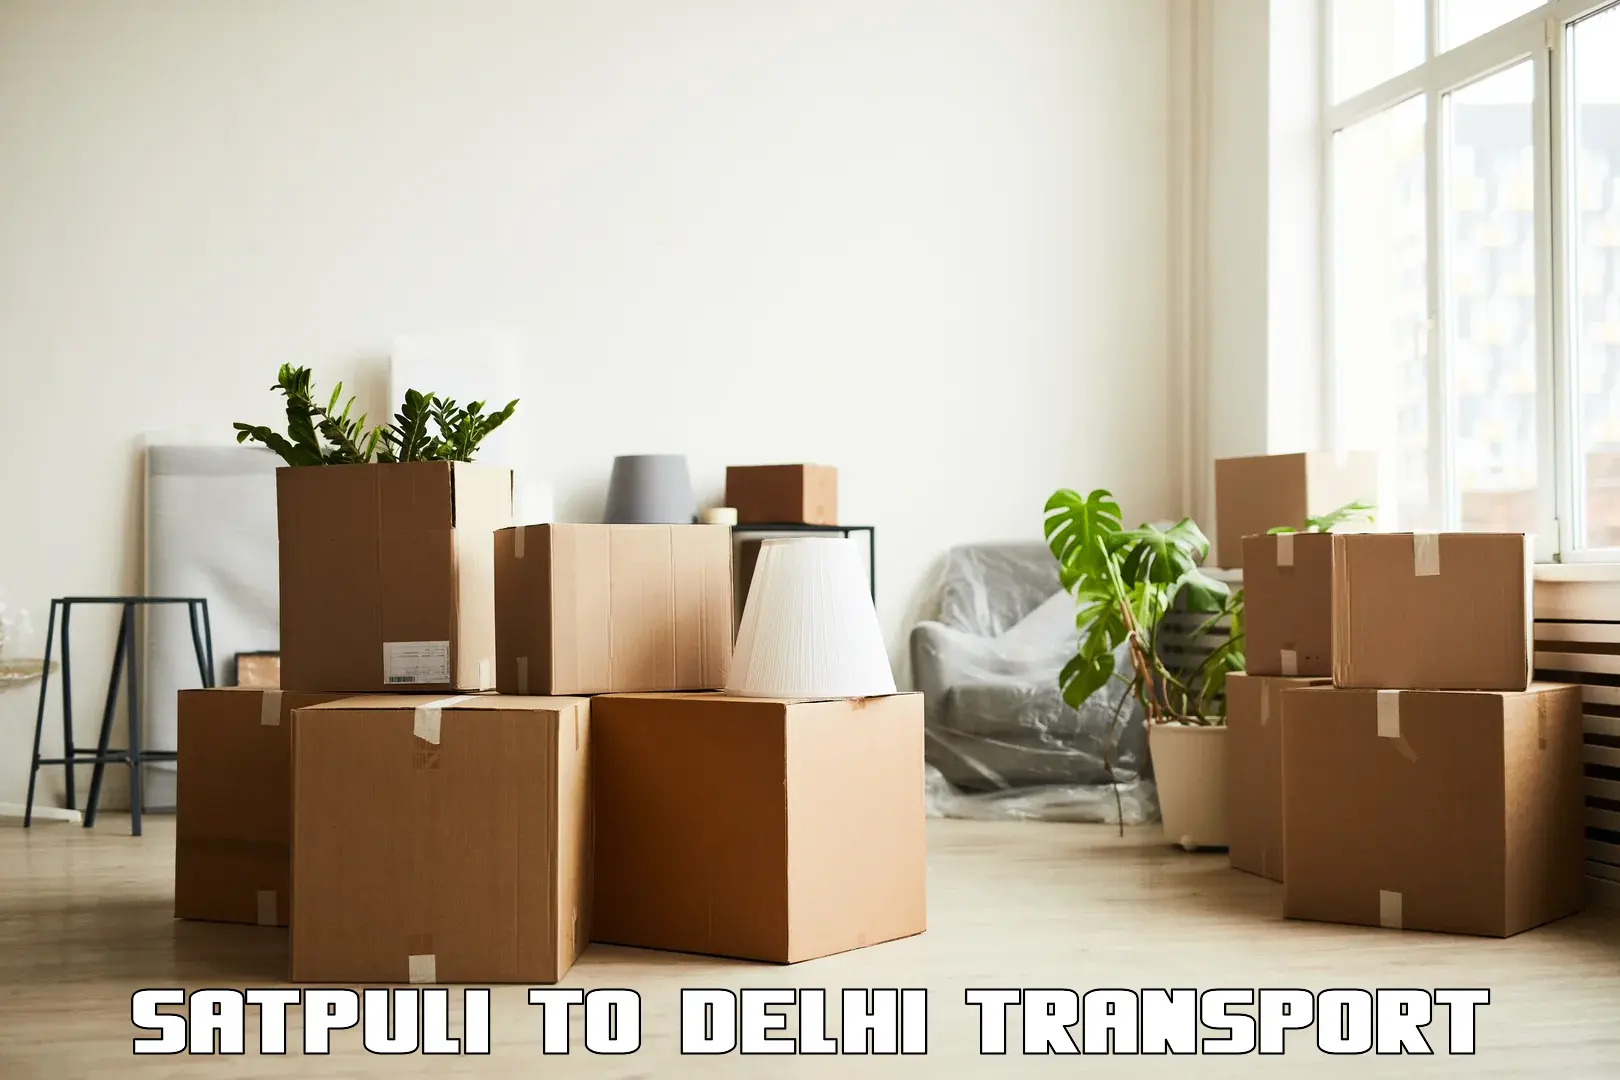 Air freight transport services Satpuli to Indraprastha